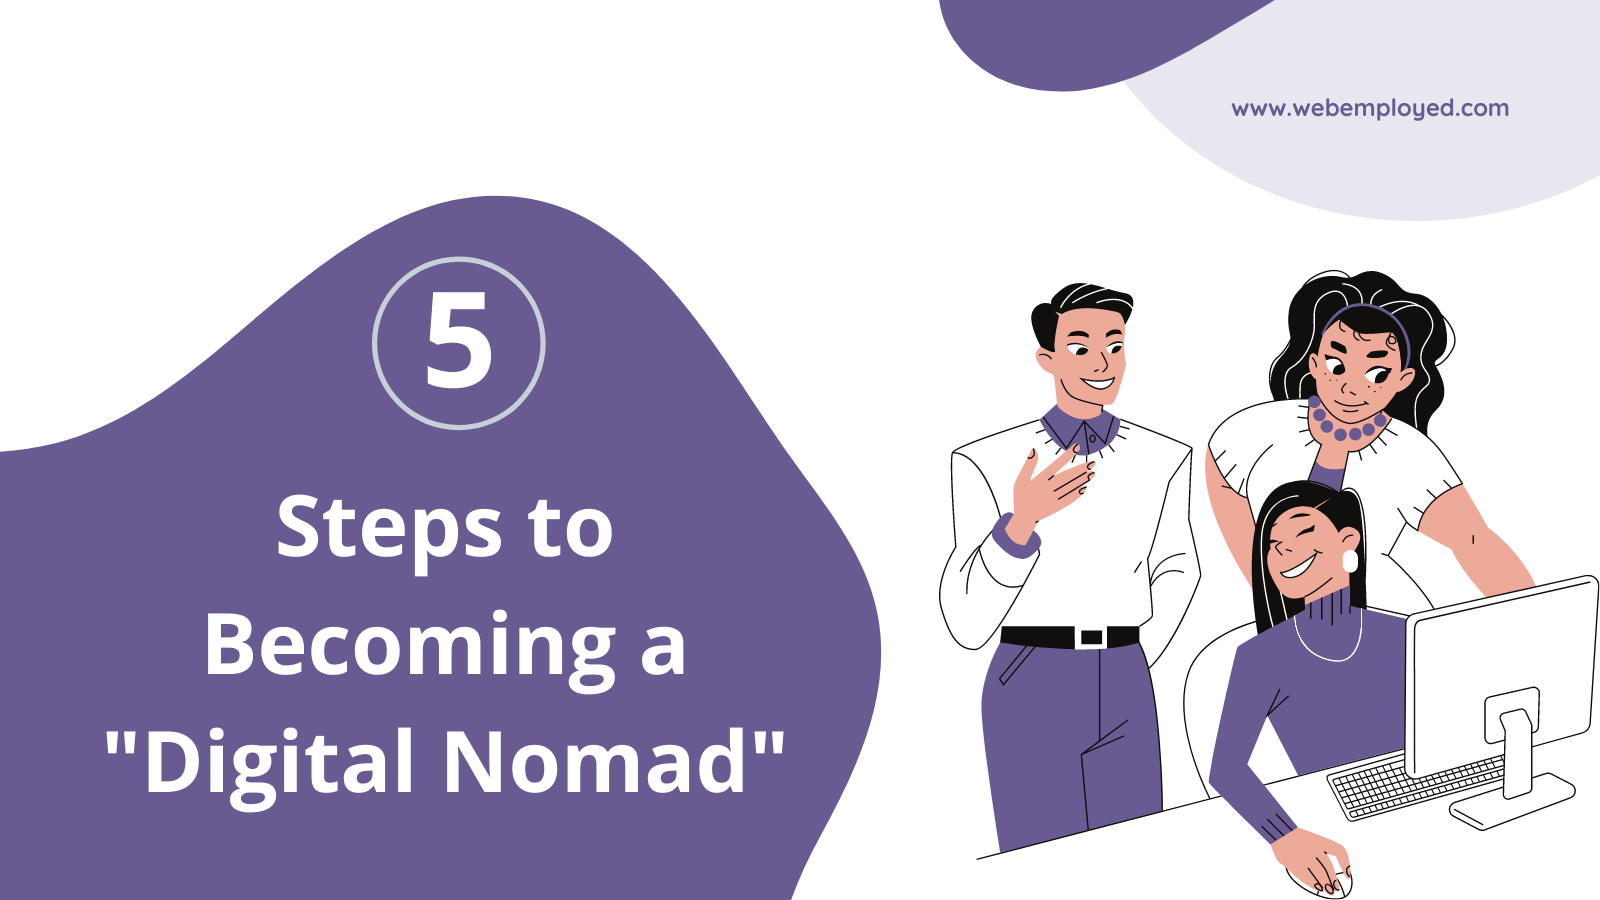 Steps to become a successful Digital Nomad